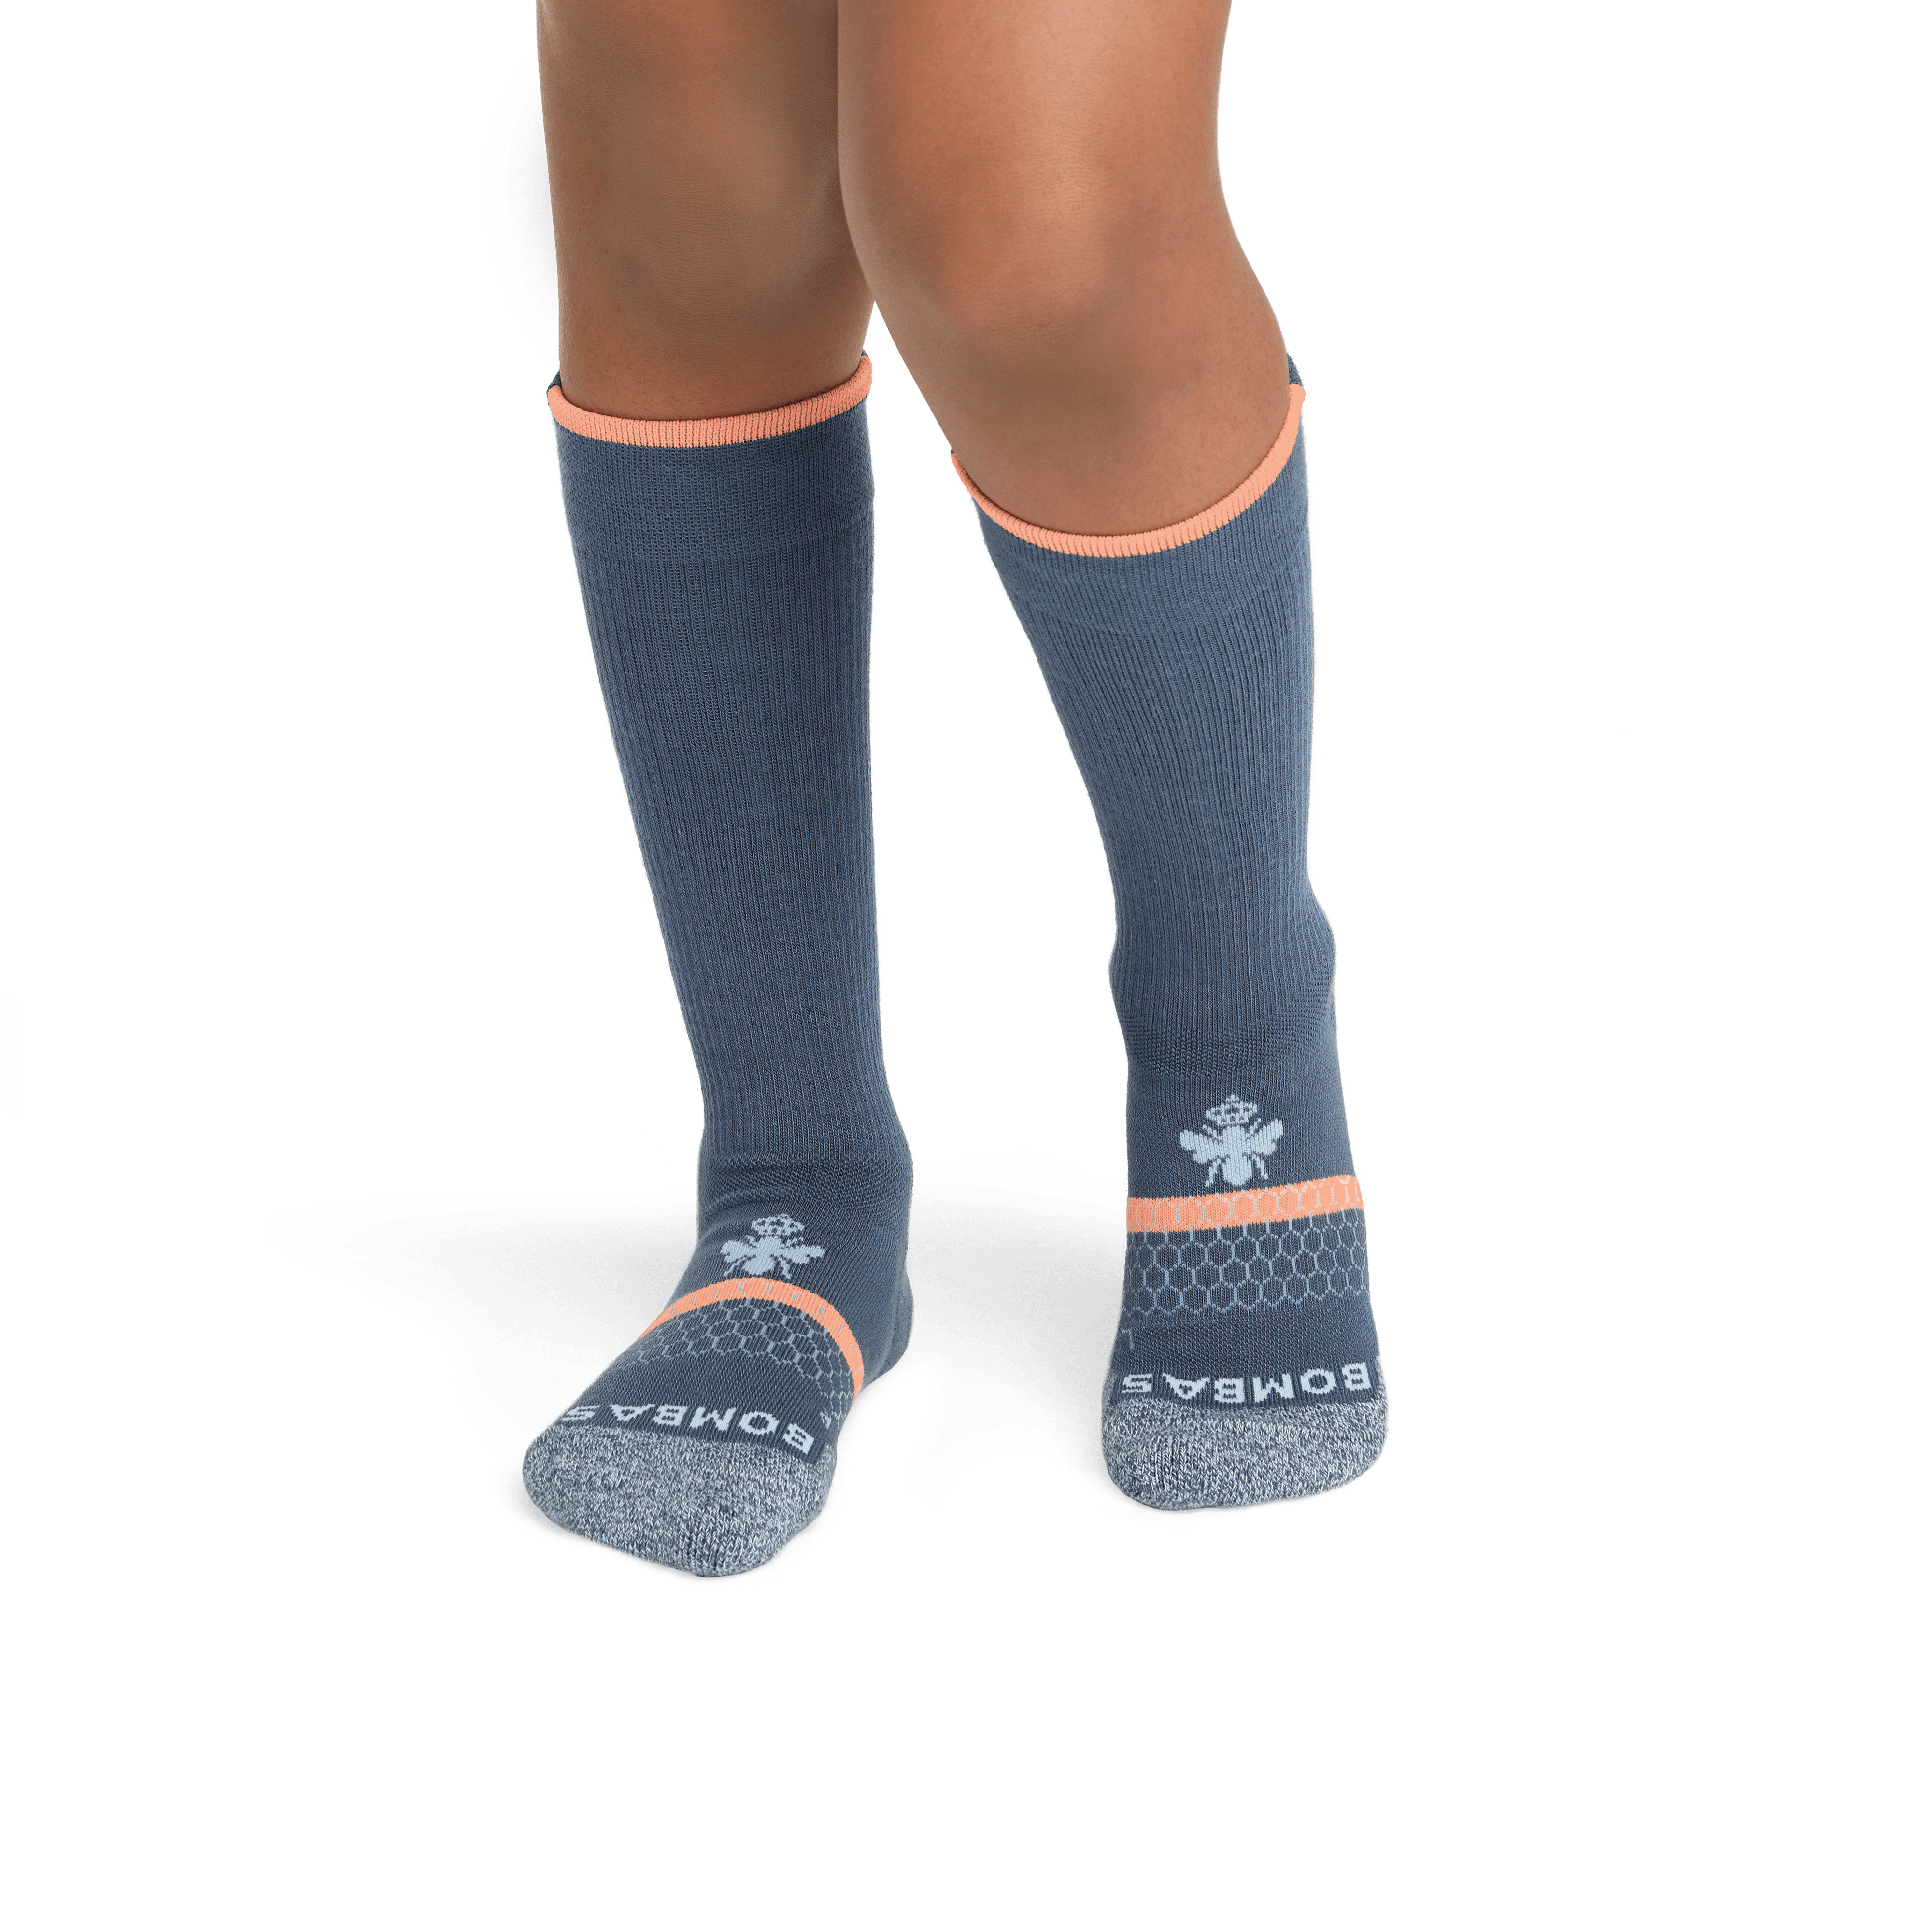 37 Pairs XS Bombas Youth Socks: All are the same size: 6.5 heel to toe